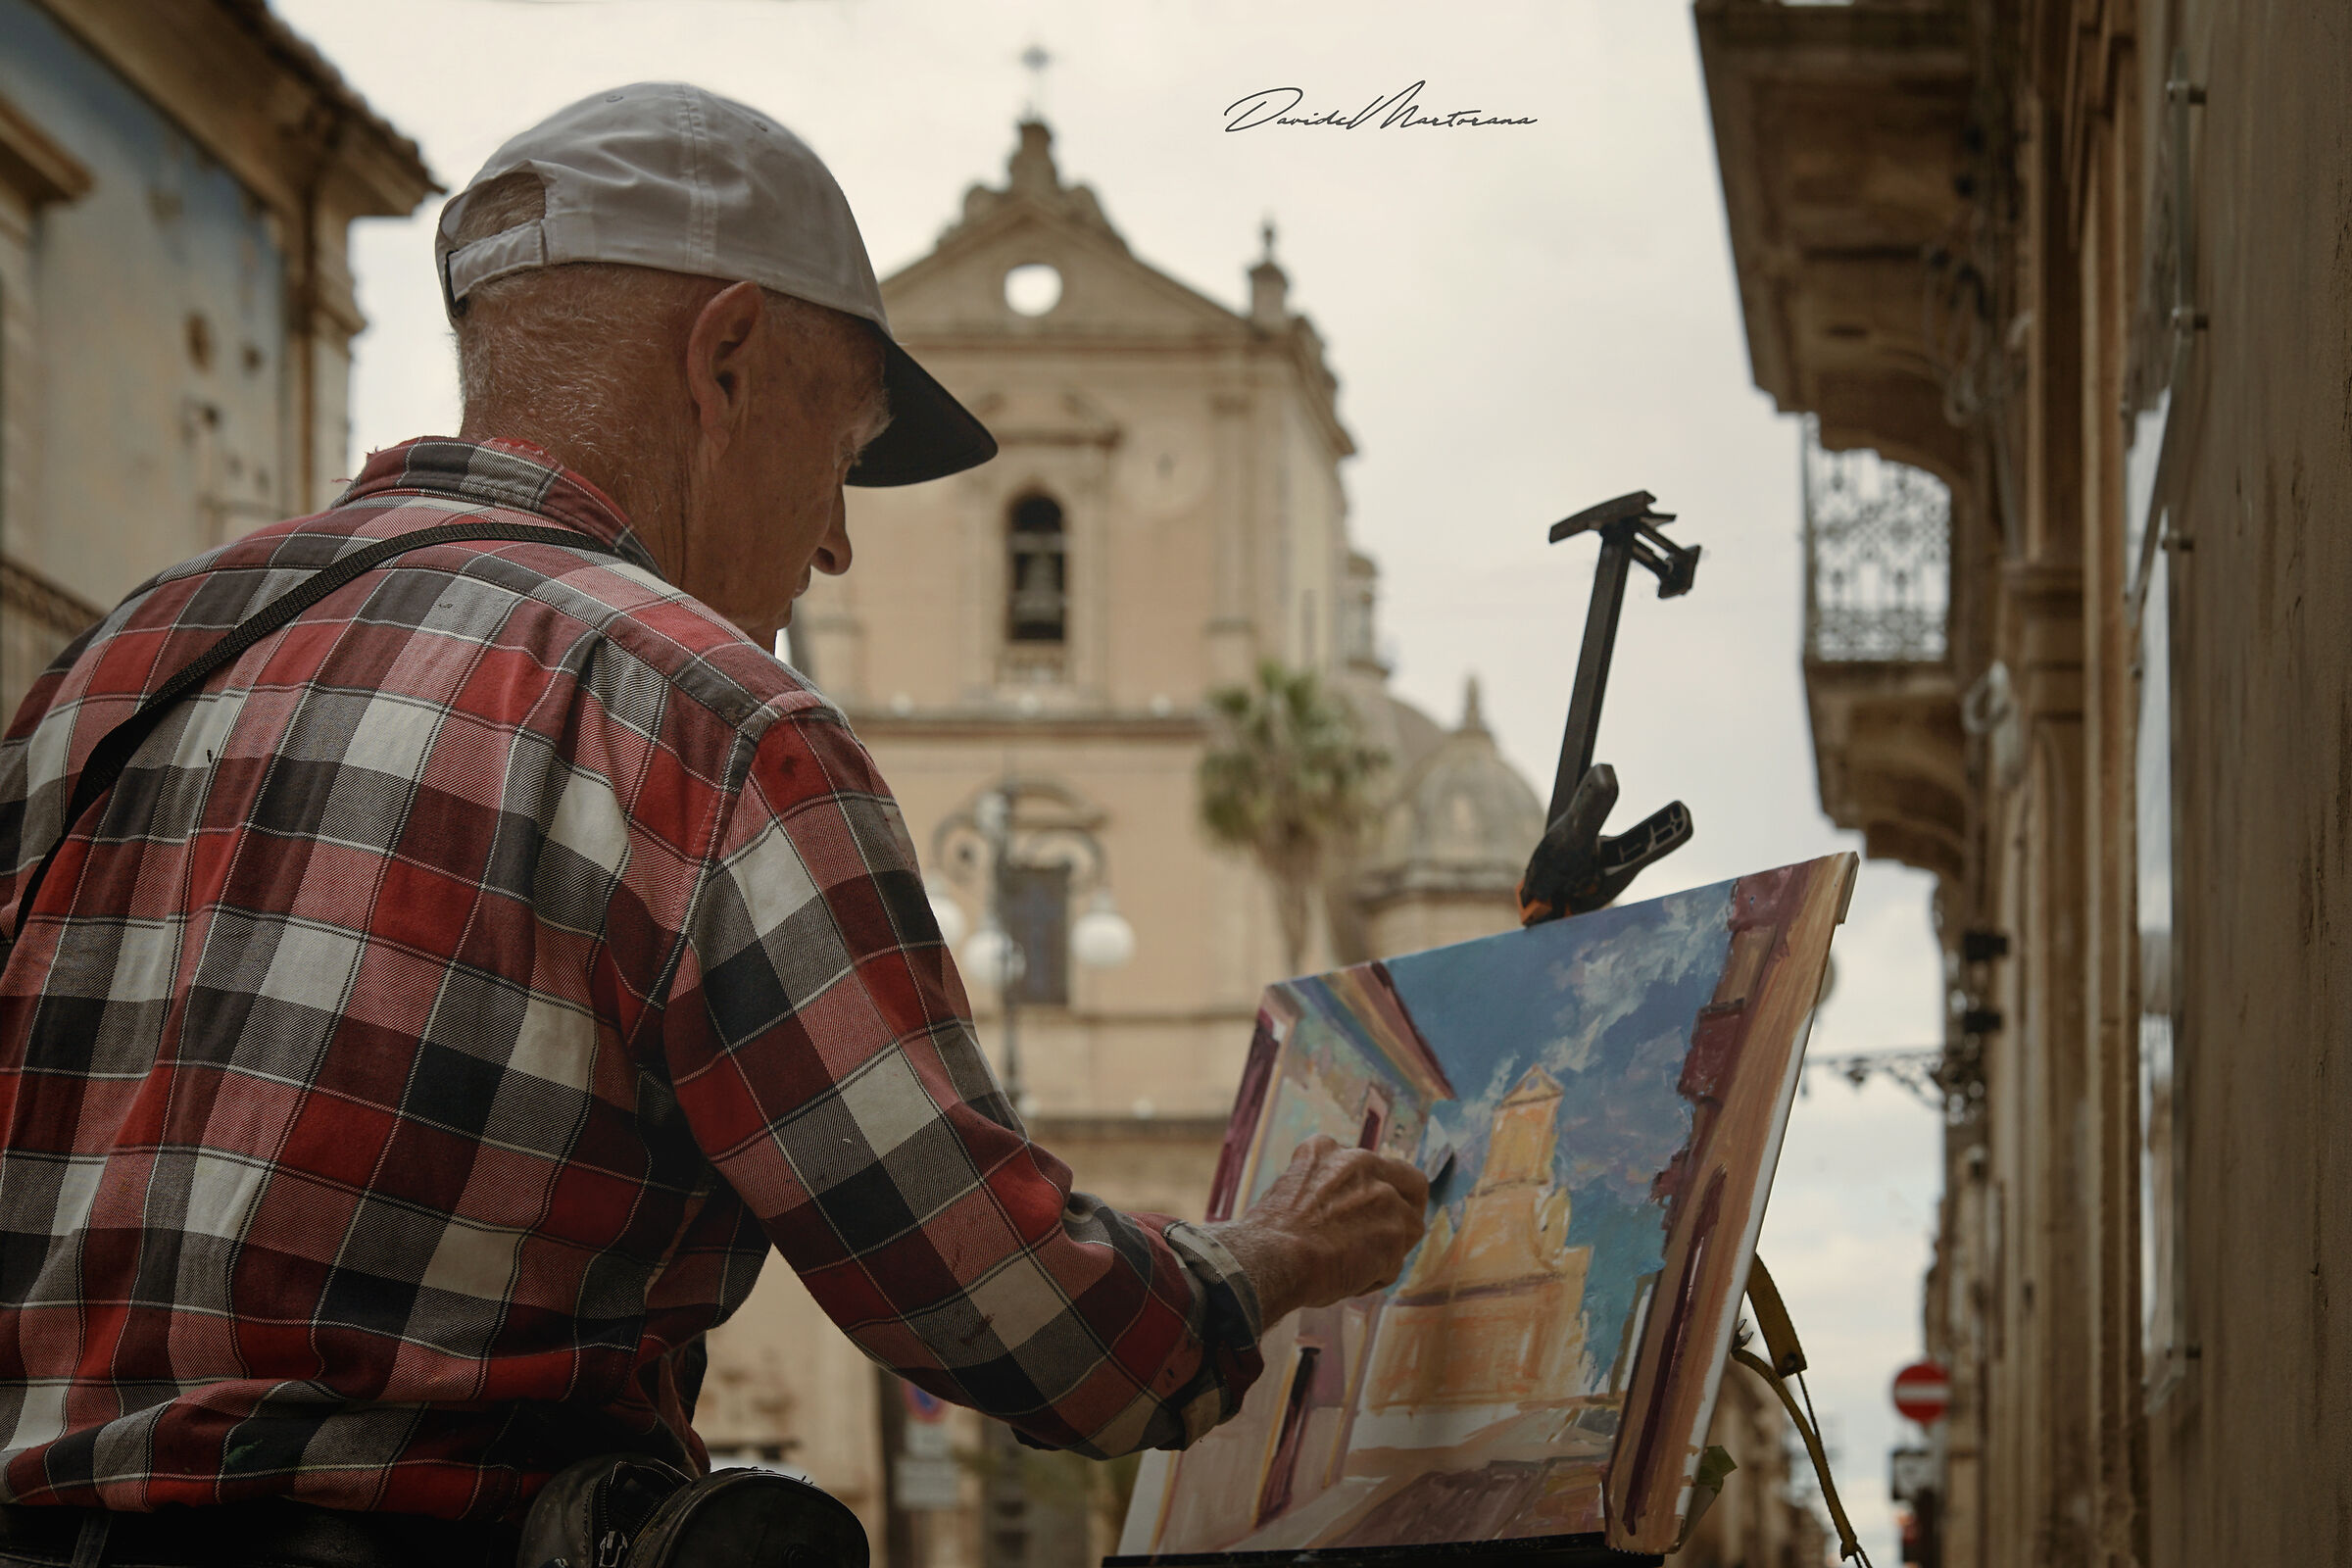 The Painter of Churches...